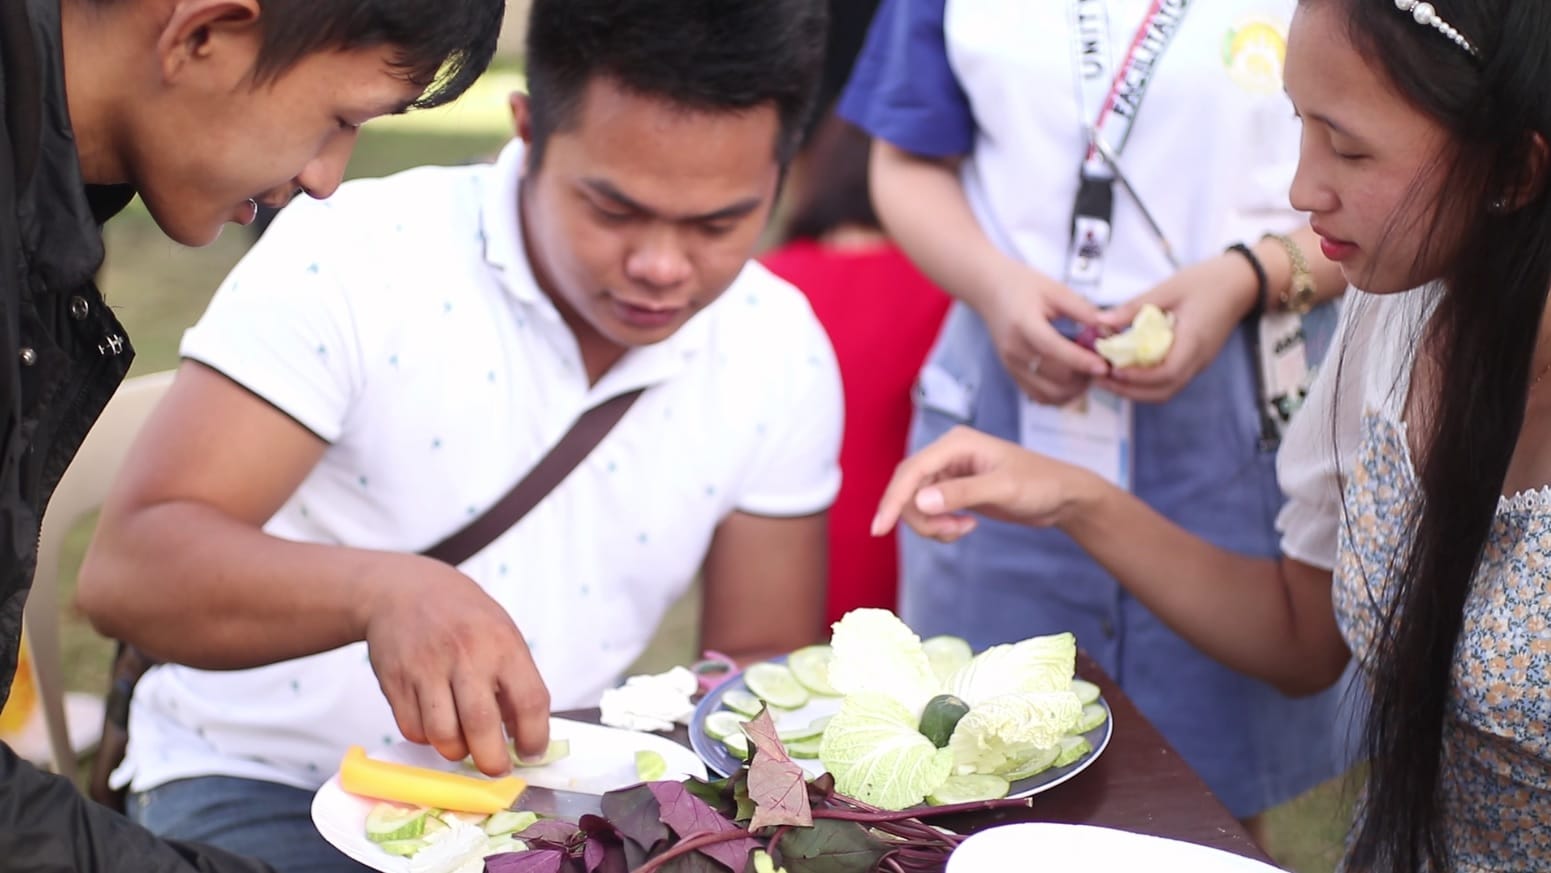 Plate decorating promotes healthy living, creativity among RTR, Agusan Norte youth